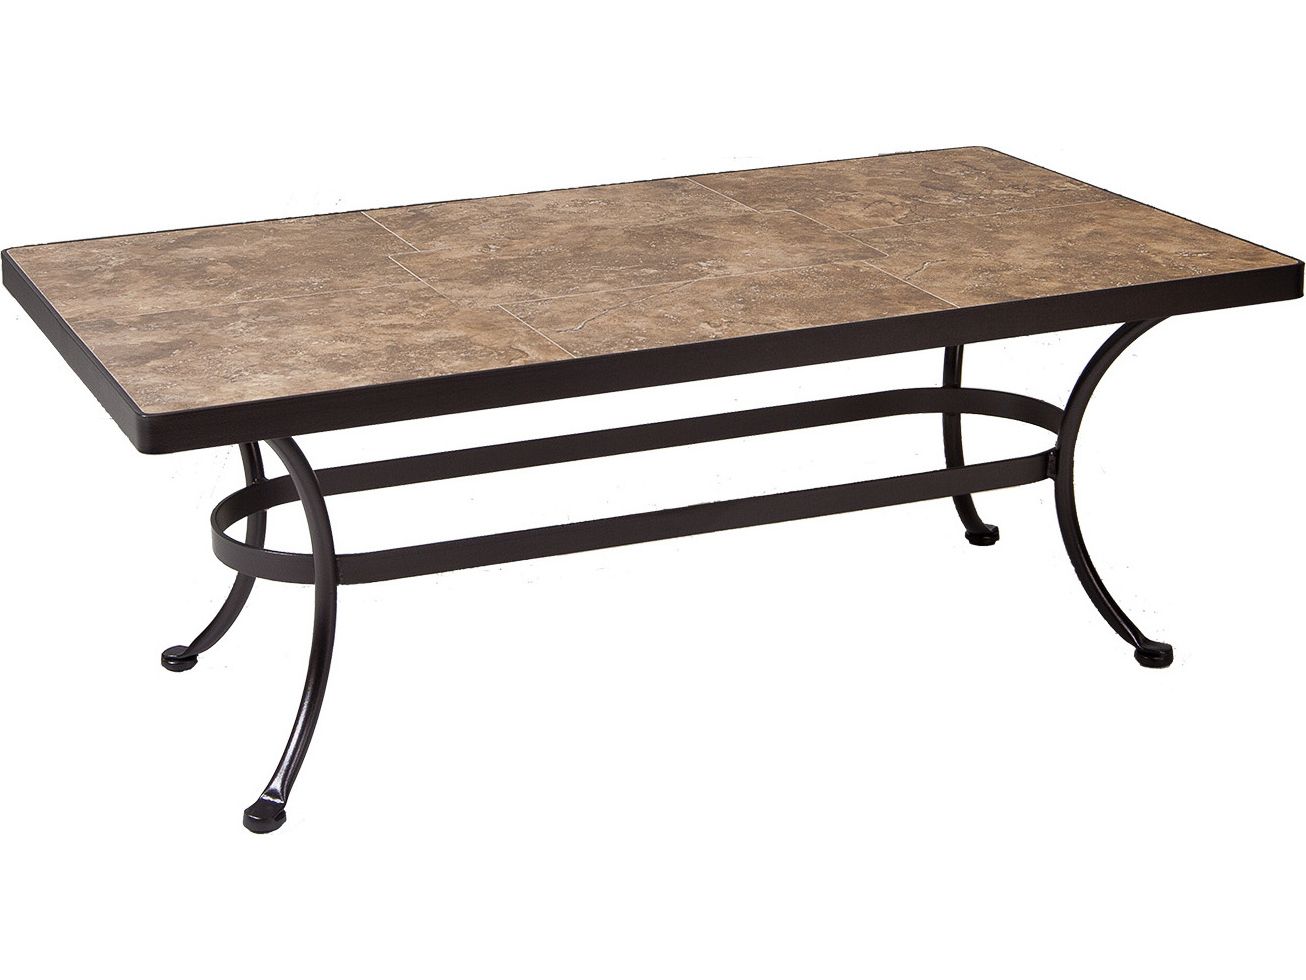 Rectangular Coffee Tables With Pedestal Bases Regarding Famous Ow Lee Wrought Iron Rectangular Coffee Table Base 43w X 20''d X  (View 7 of 15)